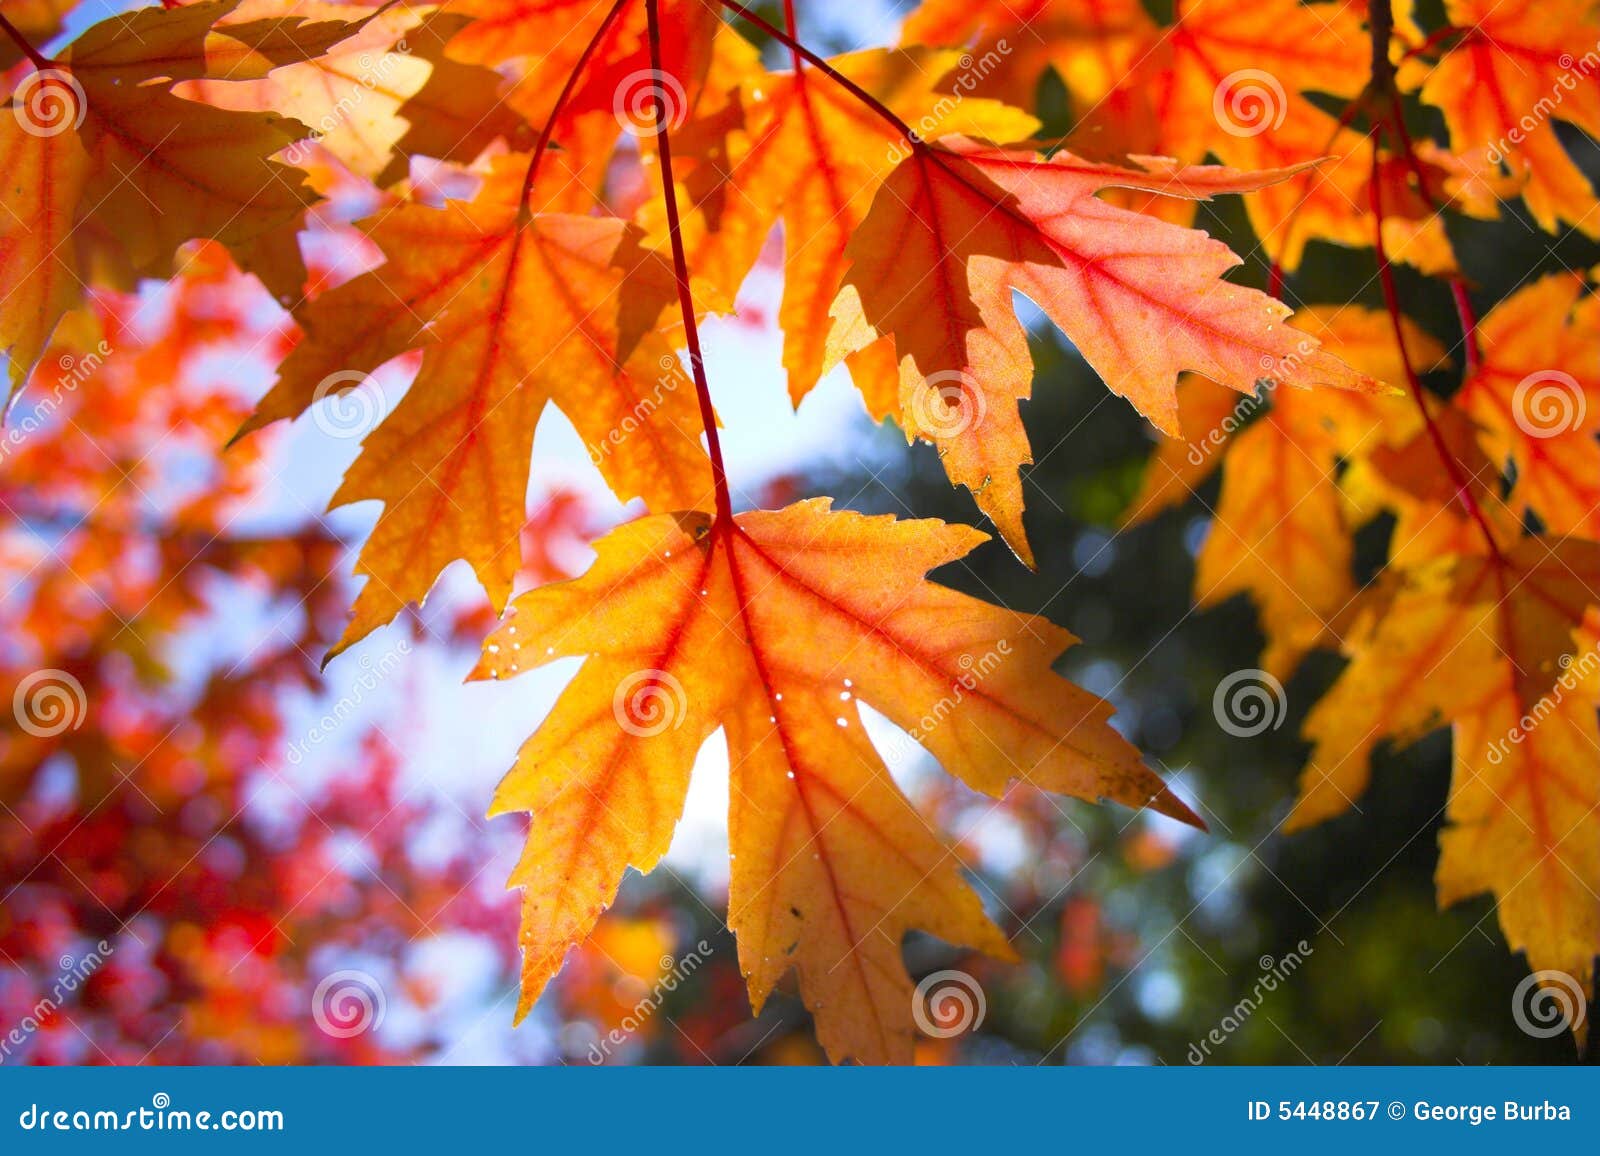 fall background